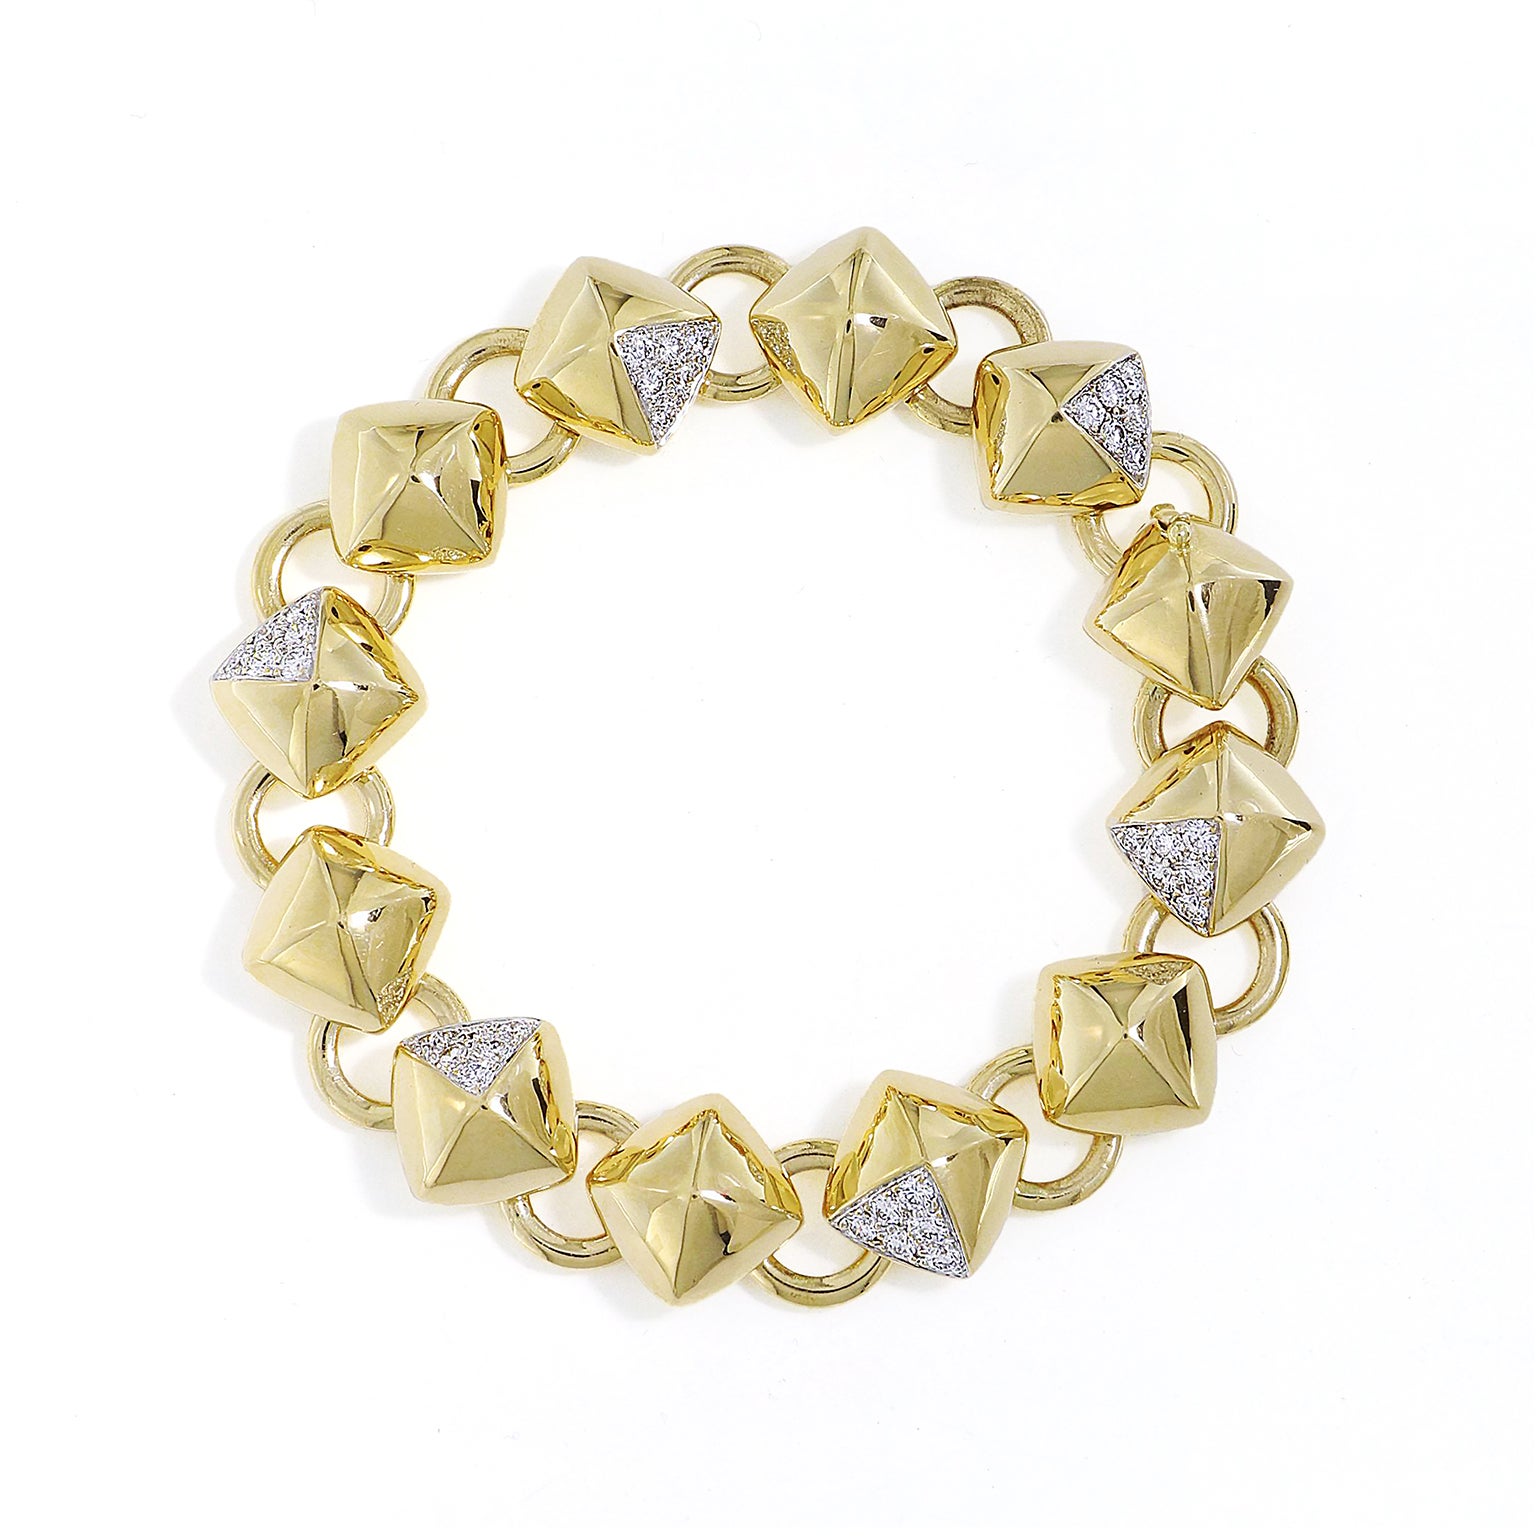 Golden pyramids rotate with diamonds for this bracelet. Connected above round links, 18k yellow gold cushions with rounded corners and a subtle raised point form a defined pyramid. Every other feature a single face of brilliant cut diamonds for a